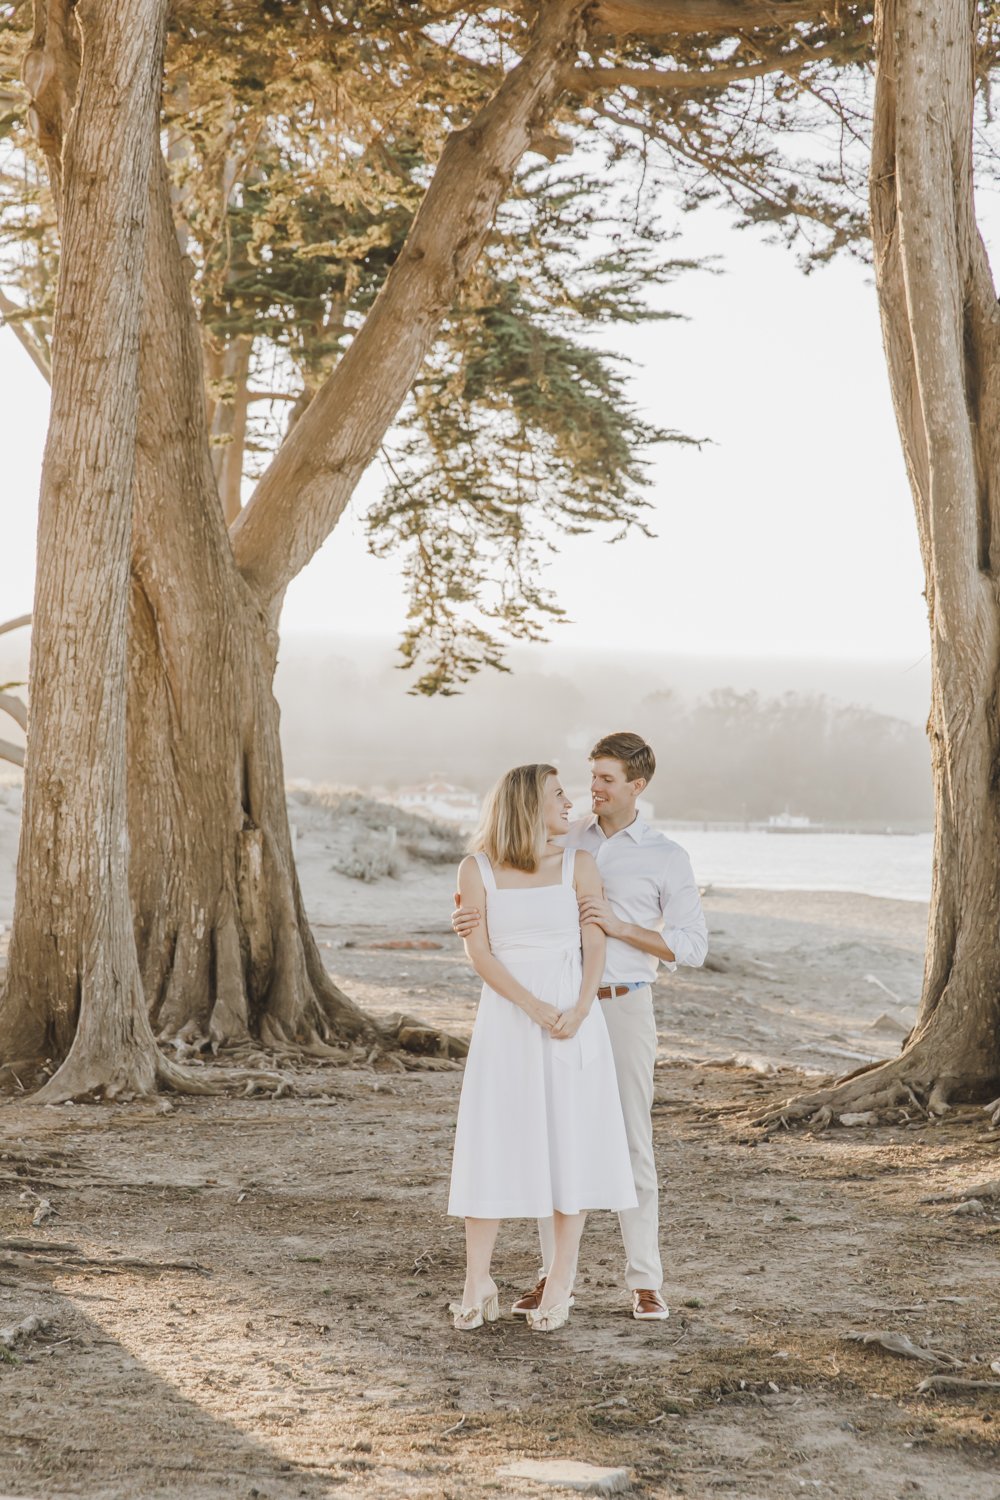 PERRUCCIPHOTO_CRISSY_FIELDS_ENGAGEMENT_14.jpg